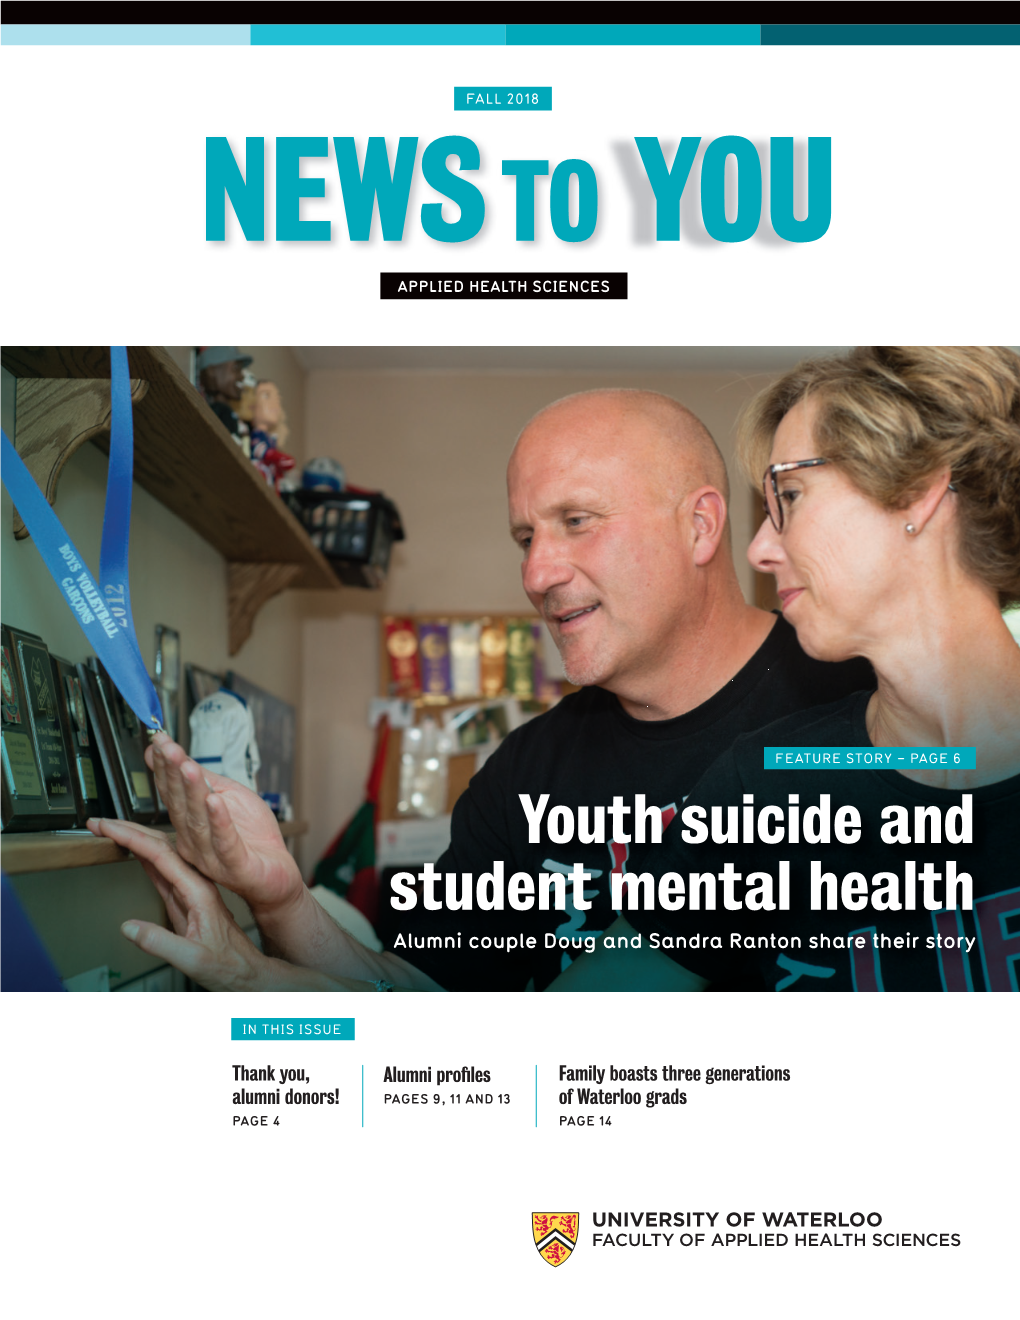 Youth Suicide and Student Mental Health Alumni Couple Doug and Sandra Ranton Share Their Story